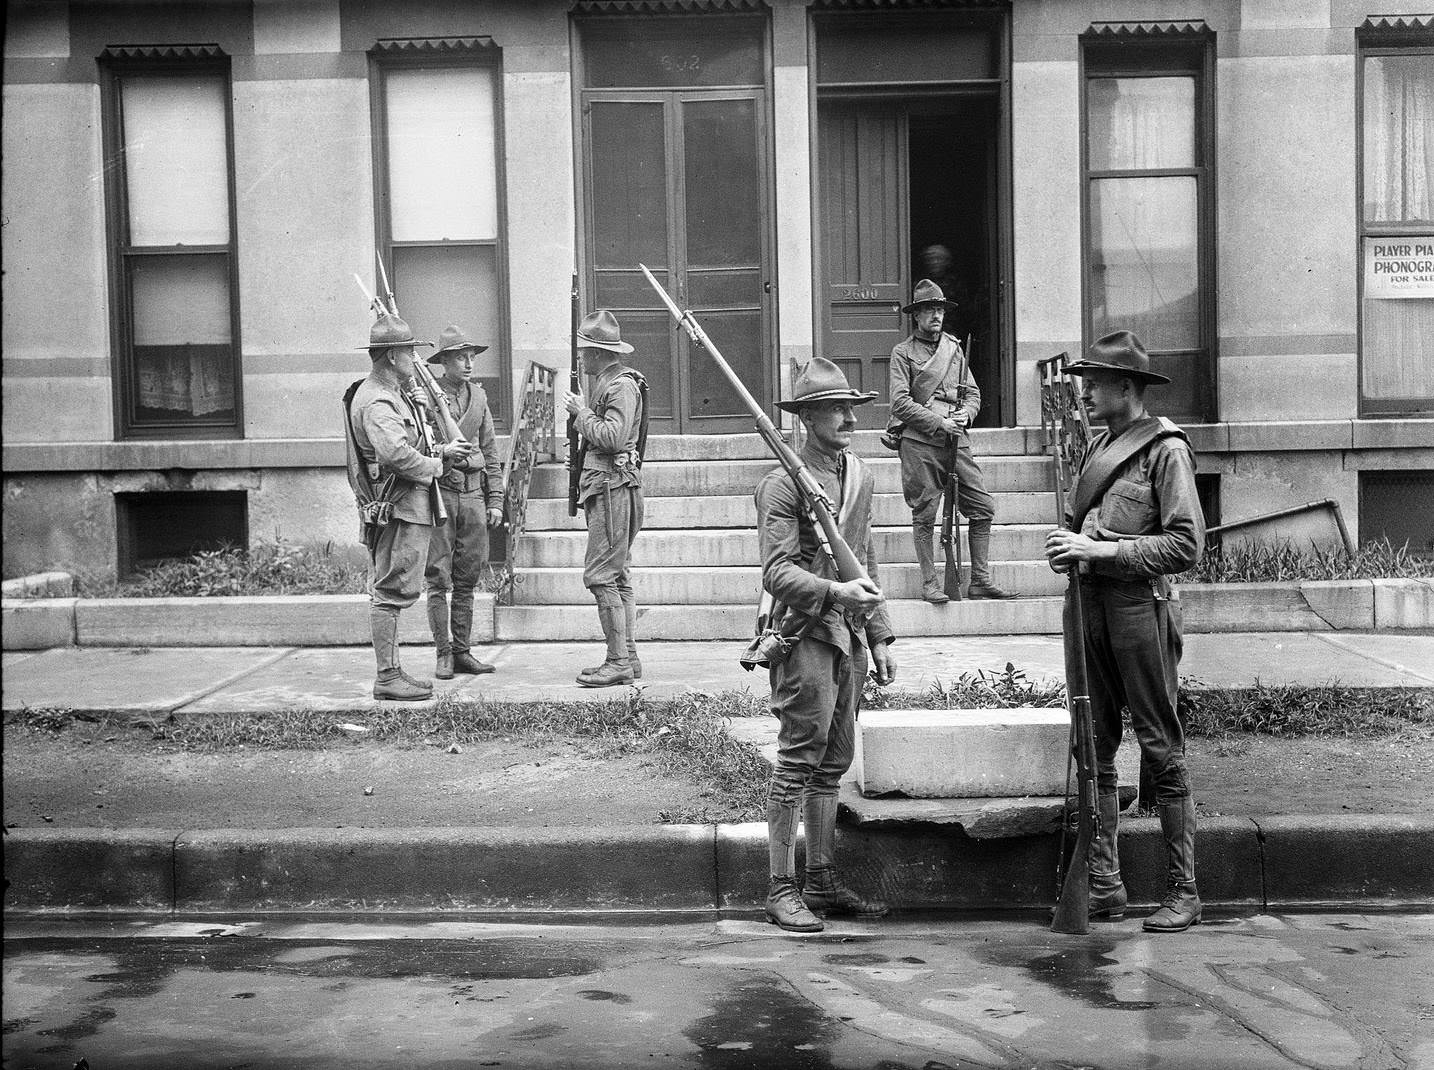 Armed National Guard standing outside apartments during the race riots in Chicago, Illinois, 1919.